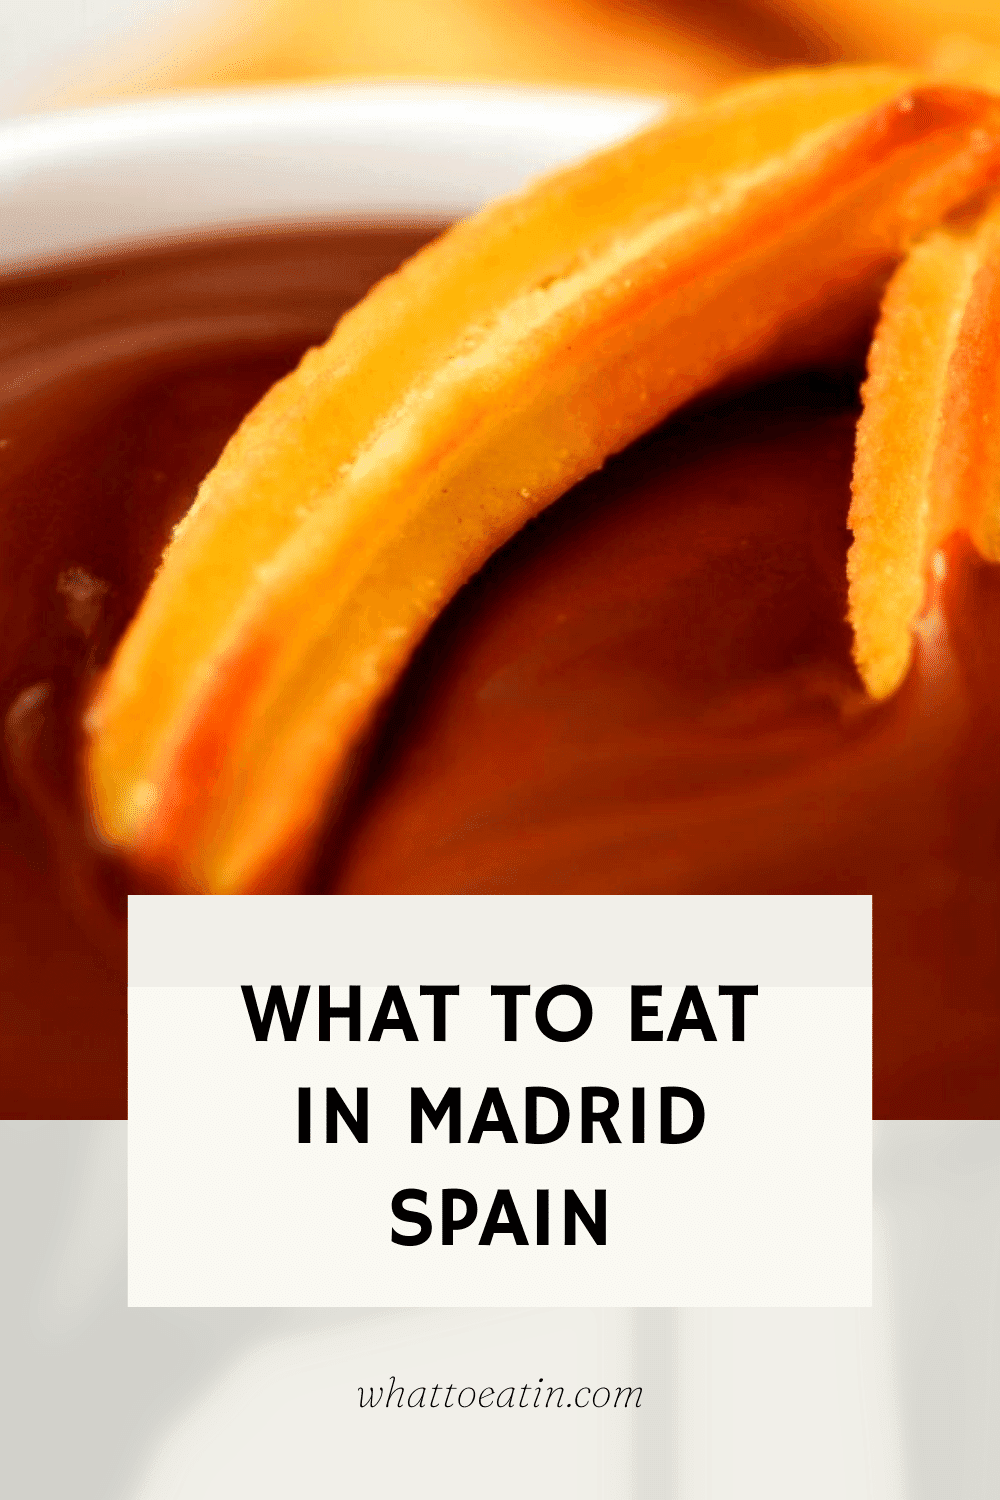 What to Eat in Madrid, Spain